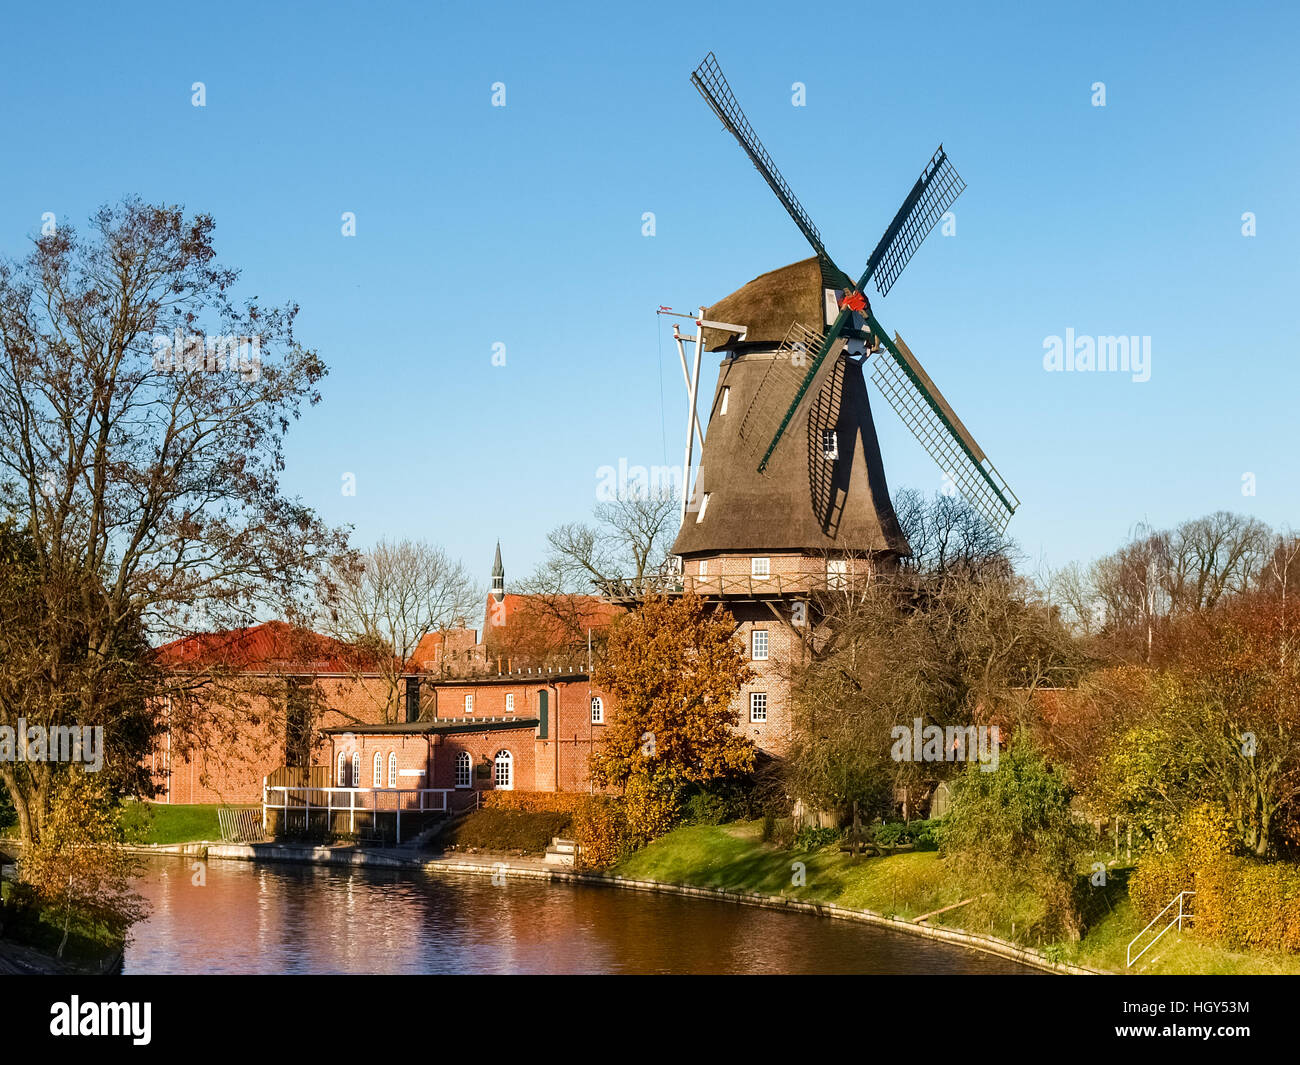 Hinte, Germany - November 4, 2011: The Mill Hinte is the only windmill in the municipality of Hinte district Aurich im Ostfriesland. The Mill was erec Stock Photo